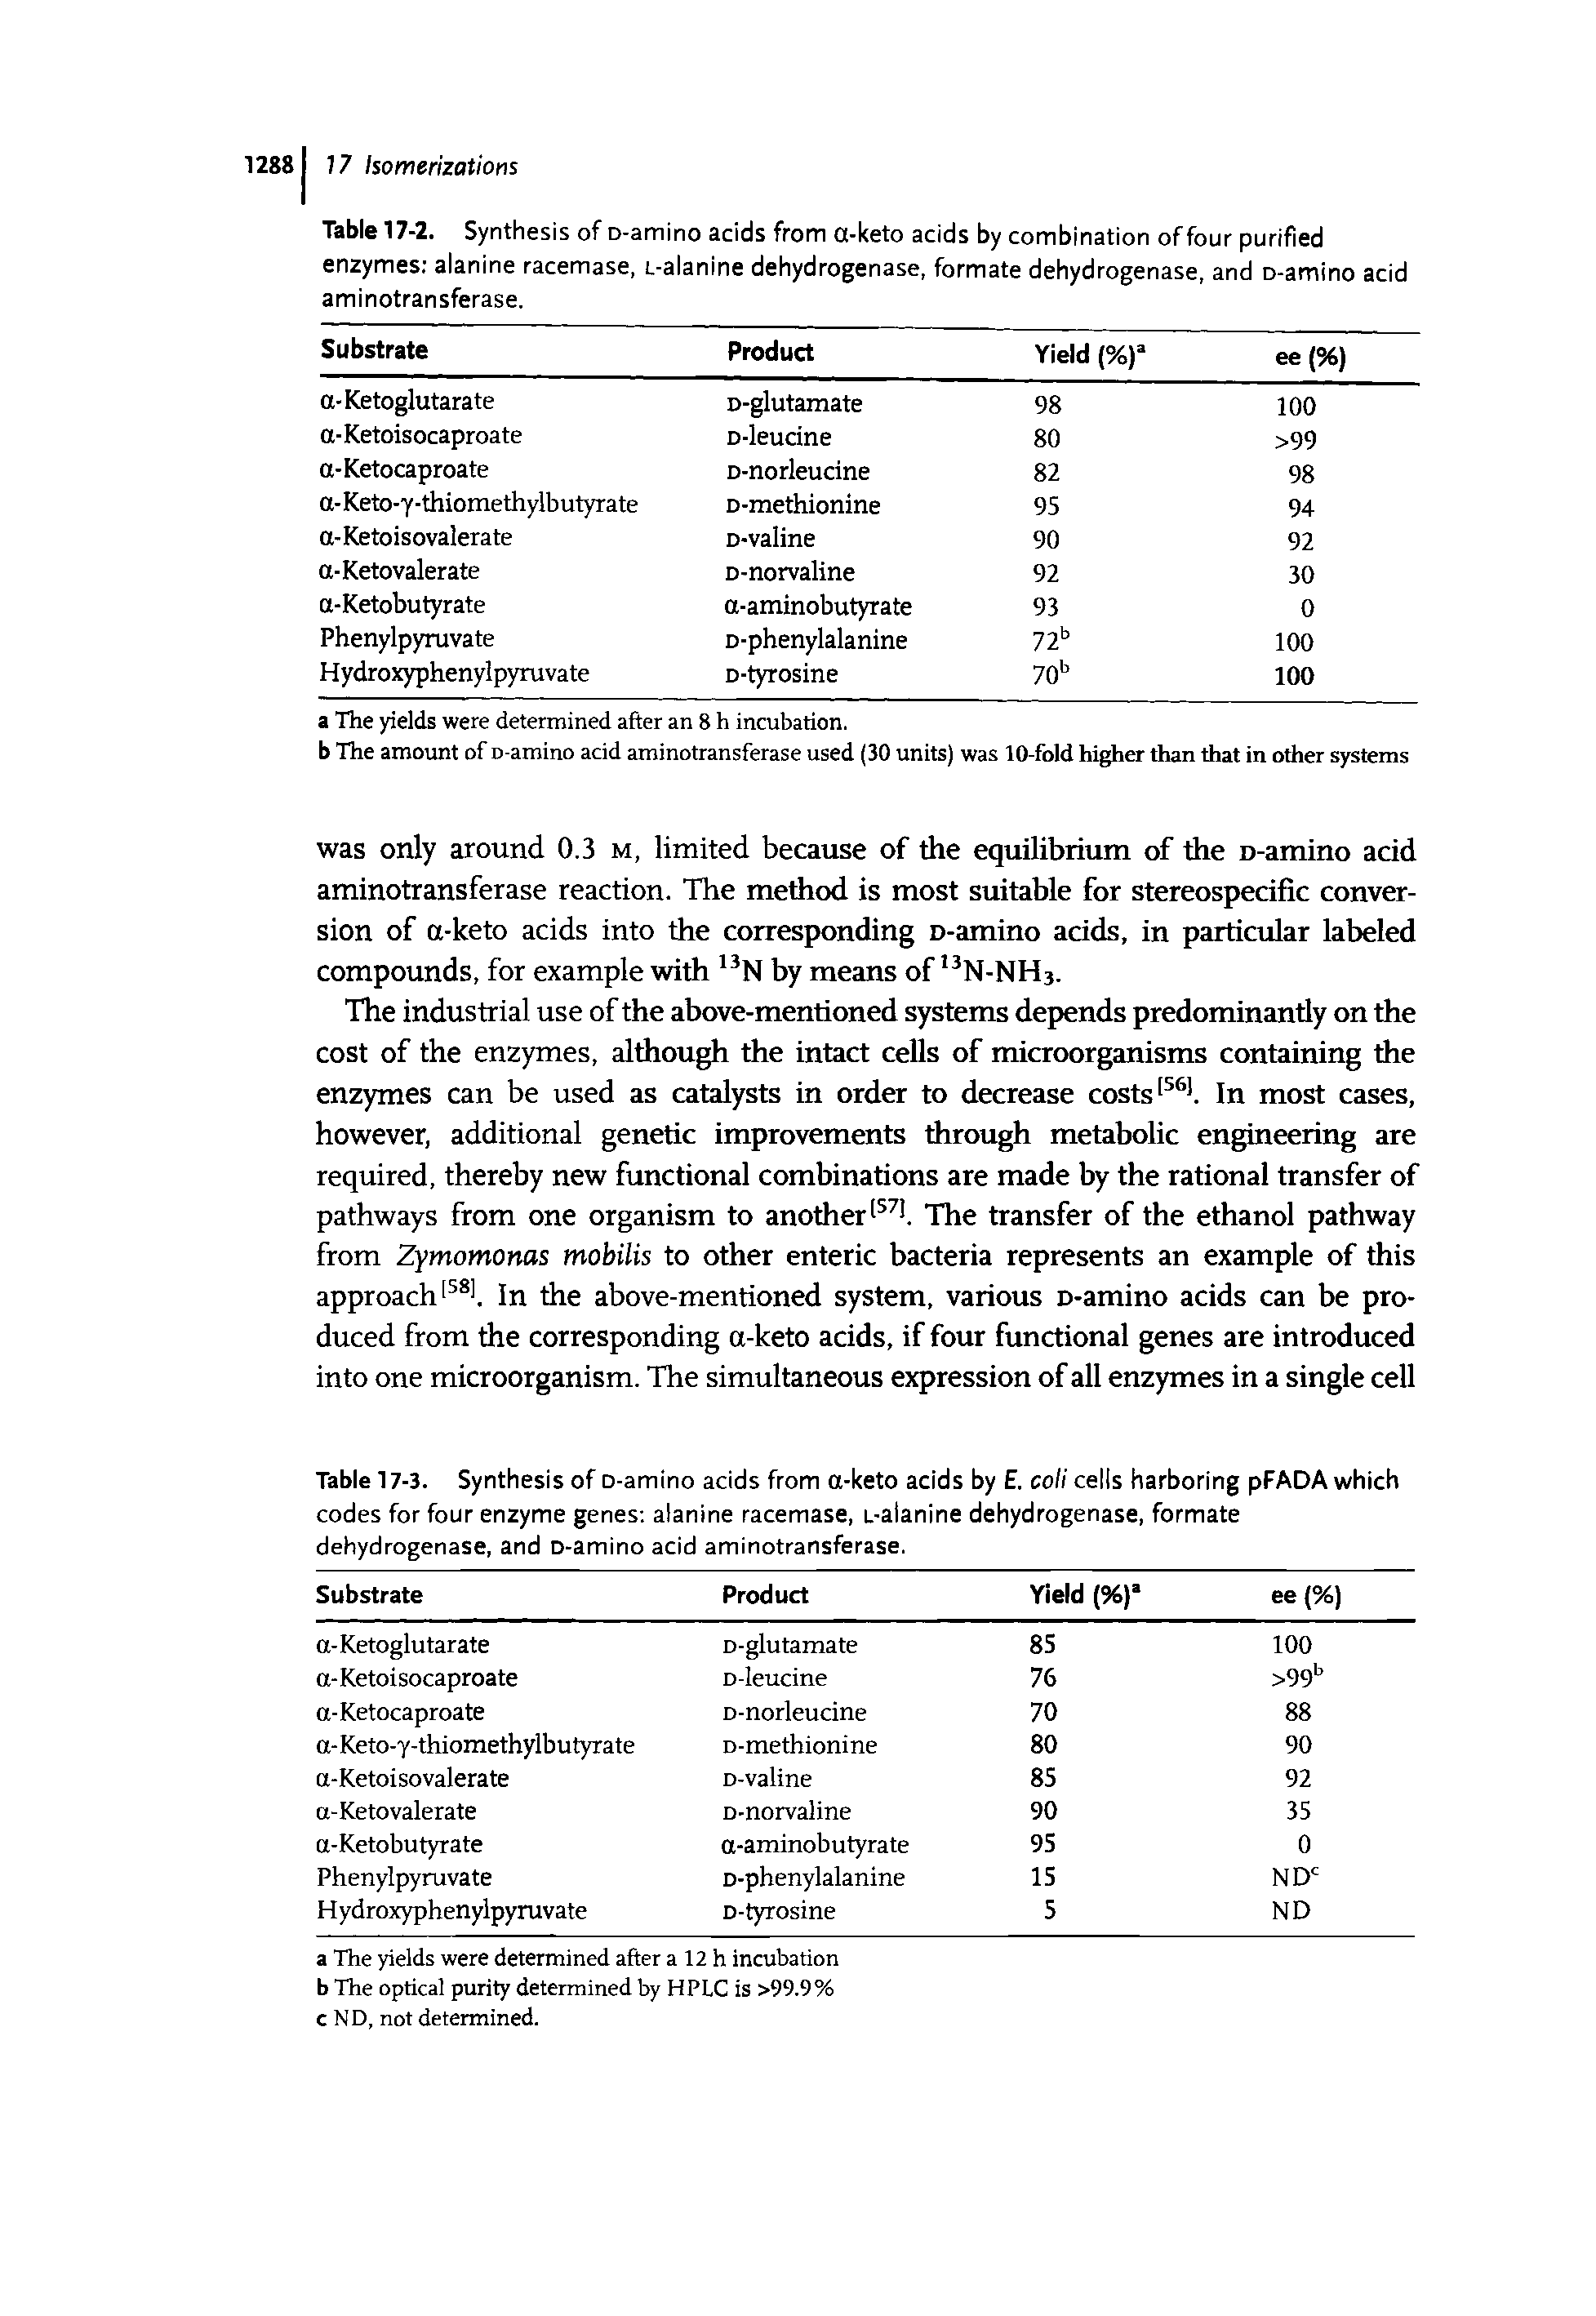 Table 17-2. Synthesis of D-amino acids from a-keto acids by combination of four purified enzymes alanine racemase, L-alanine dehydrogenase, formate dehydrogenase, and D-amino acid aminotransferase.